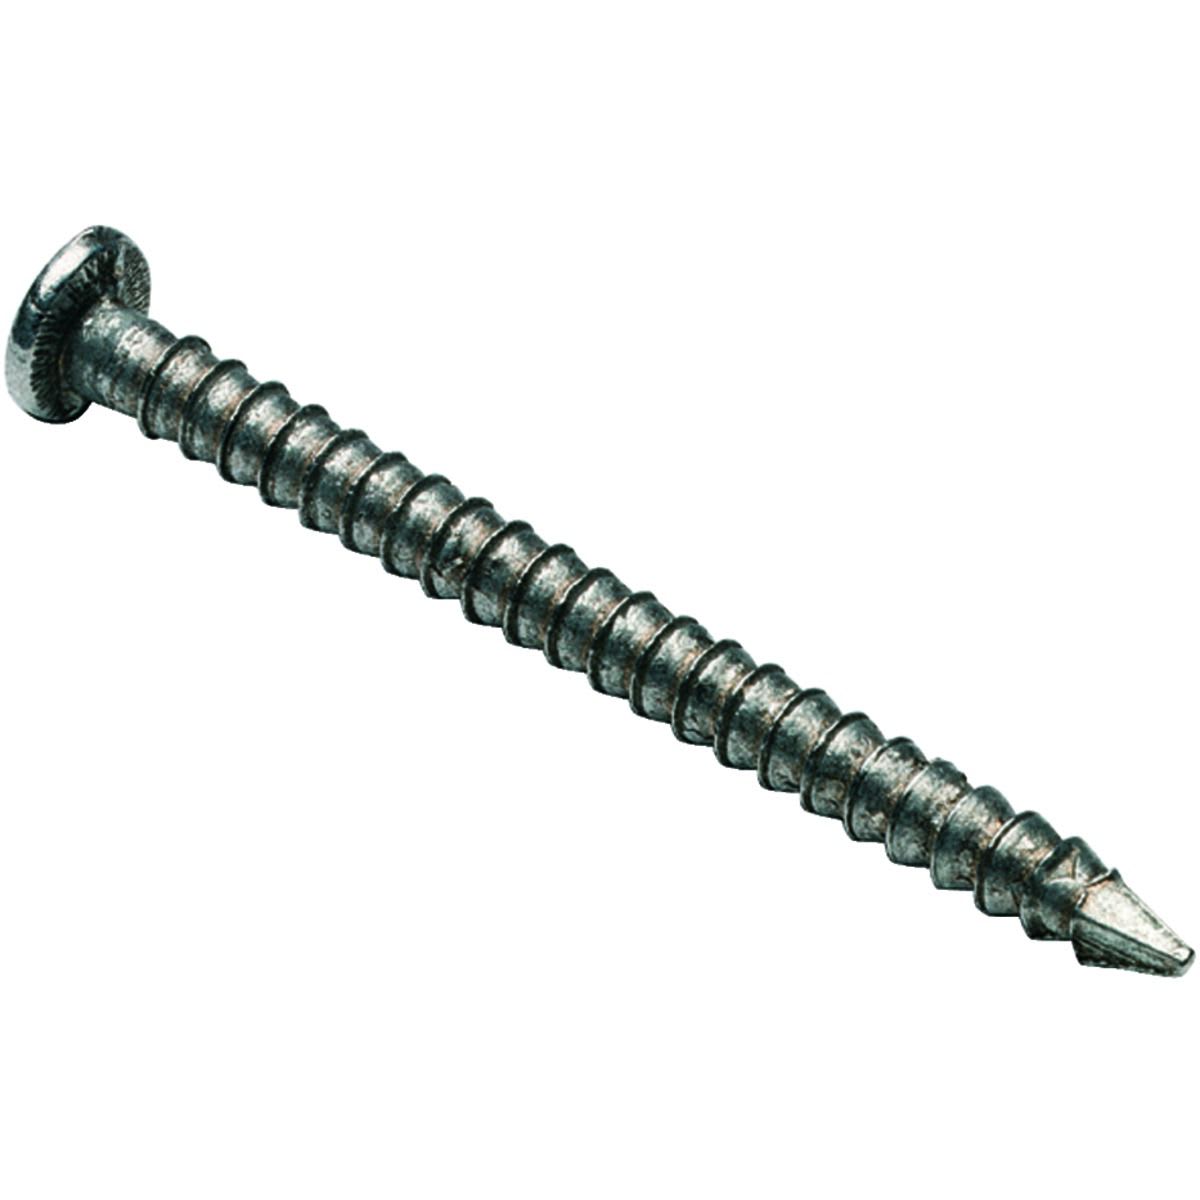 Wickes 25mm Bright Annular Extra Grip Nails -